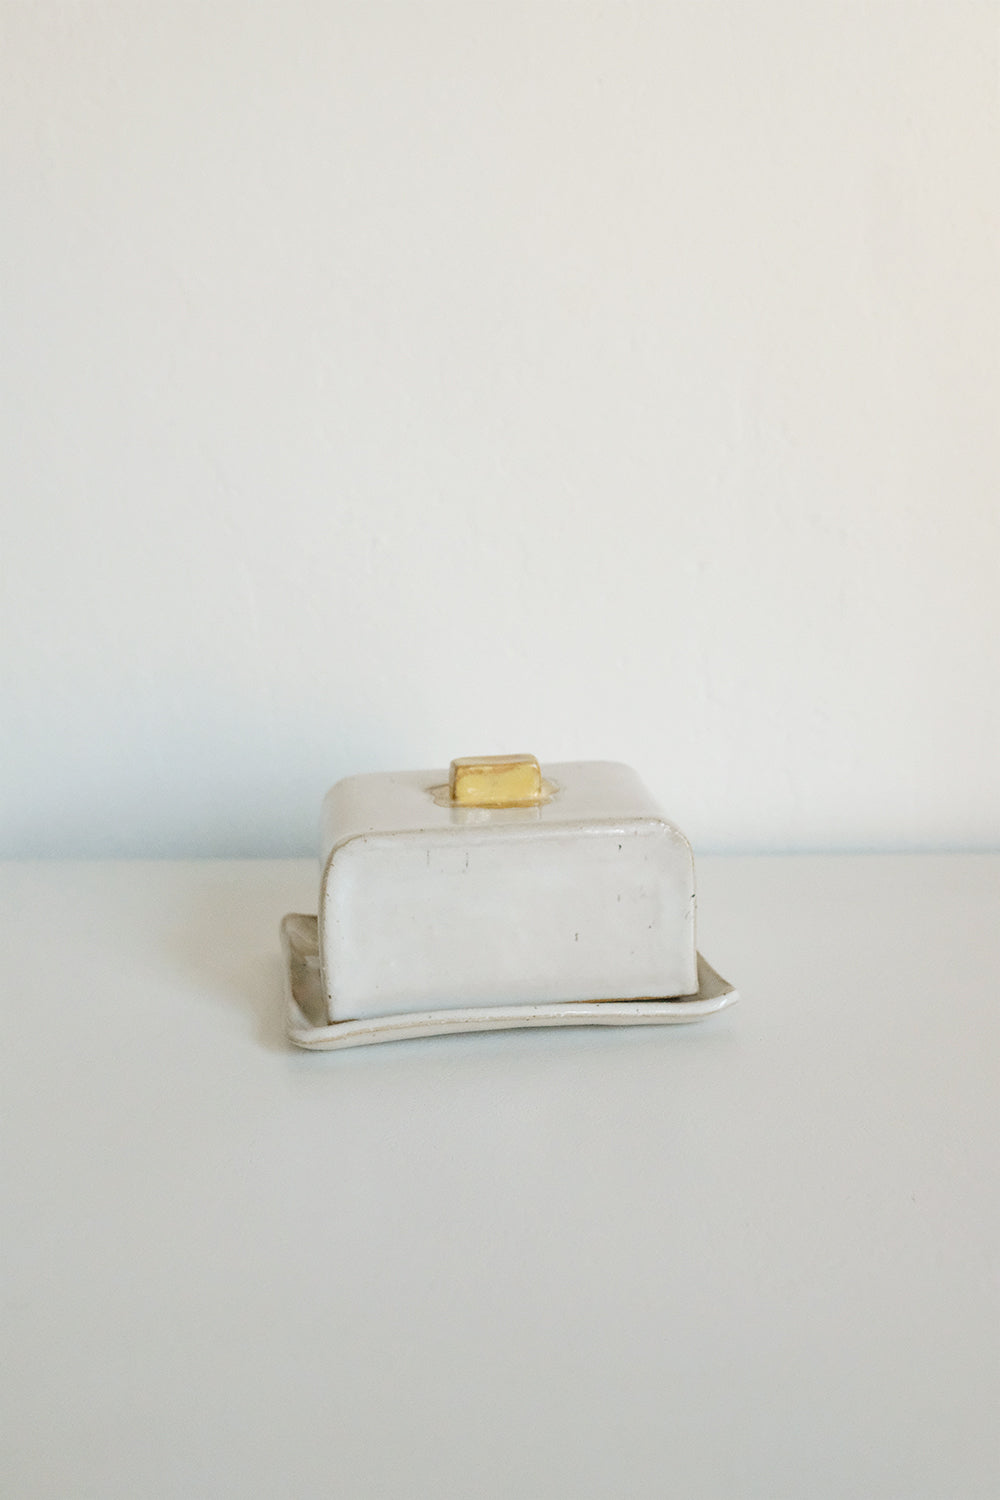 melted butter dish